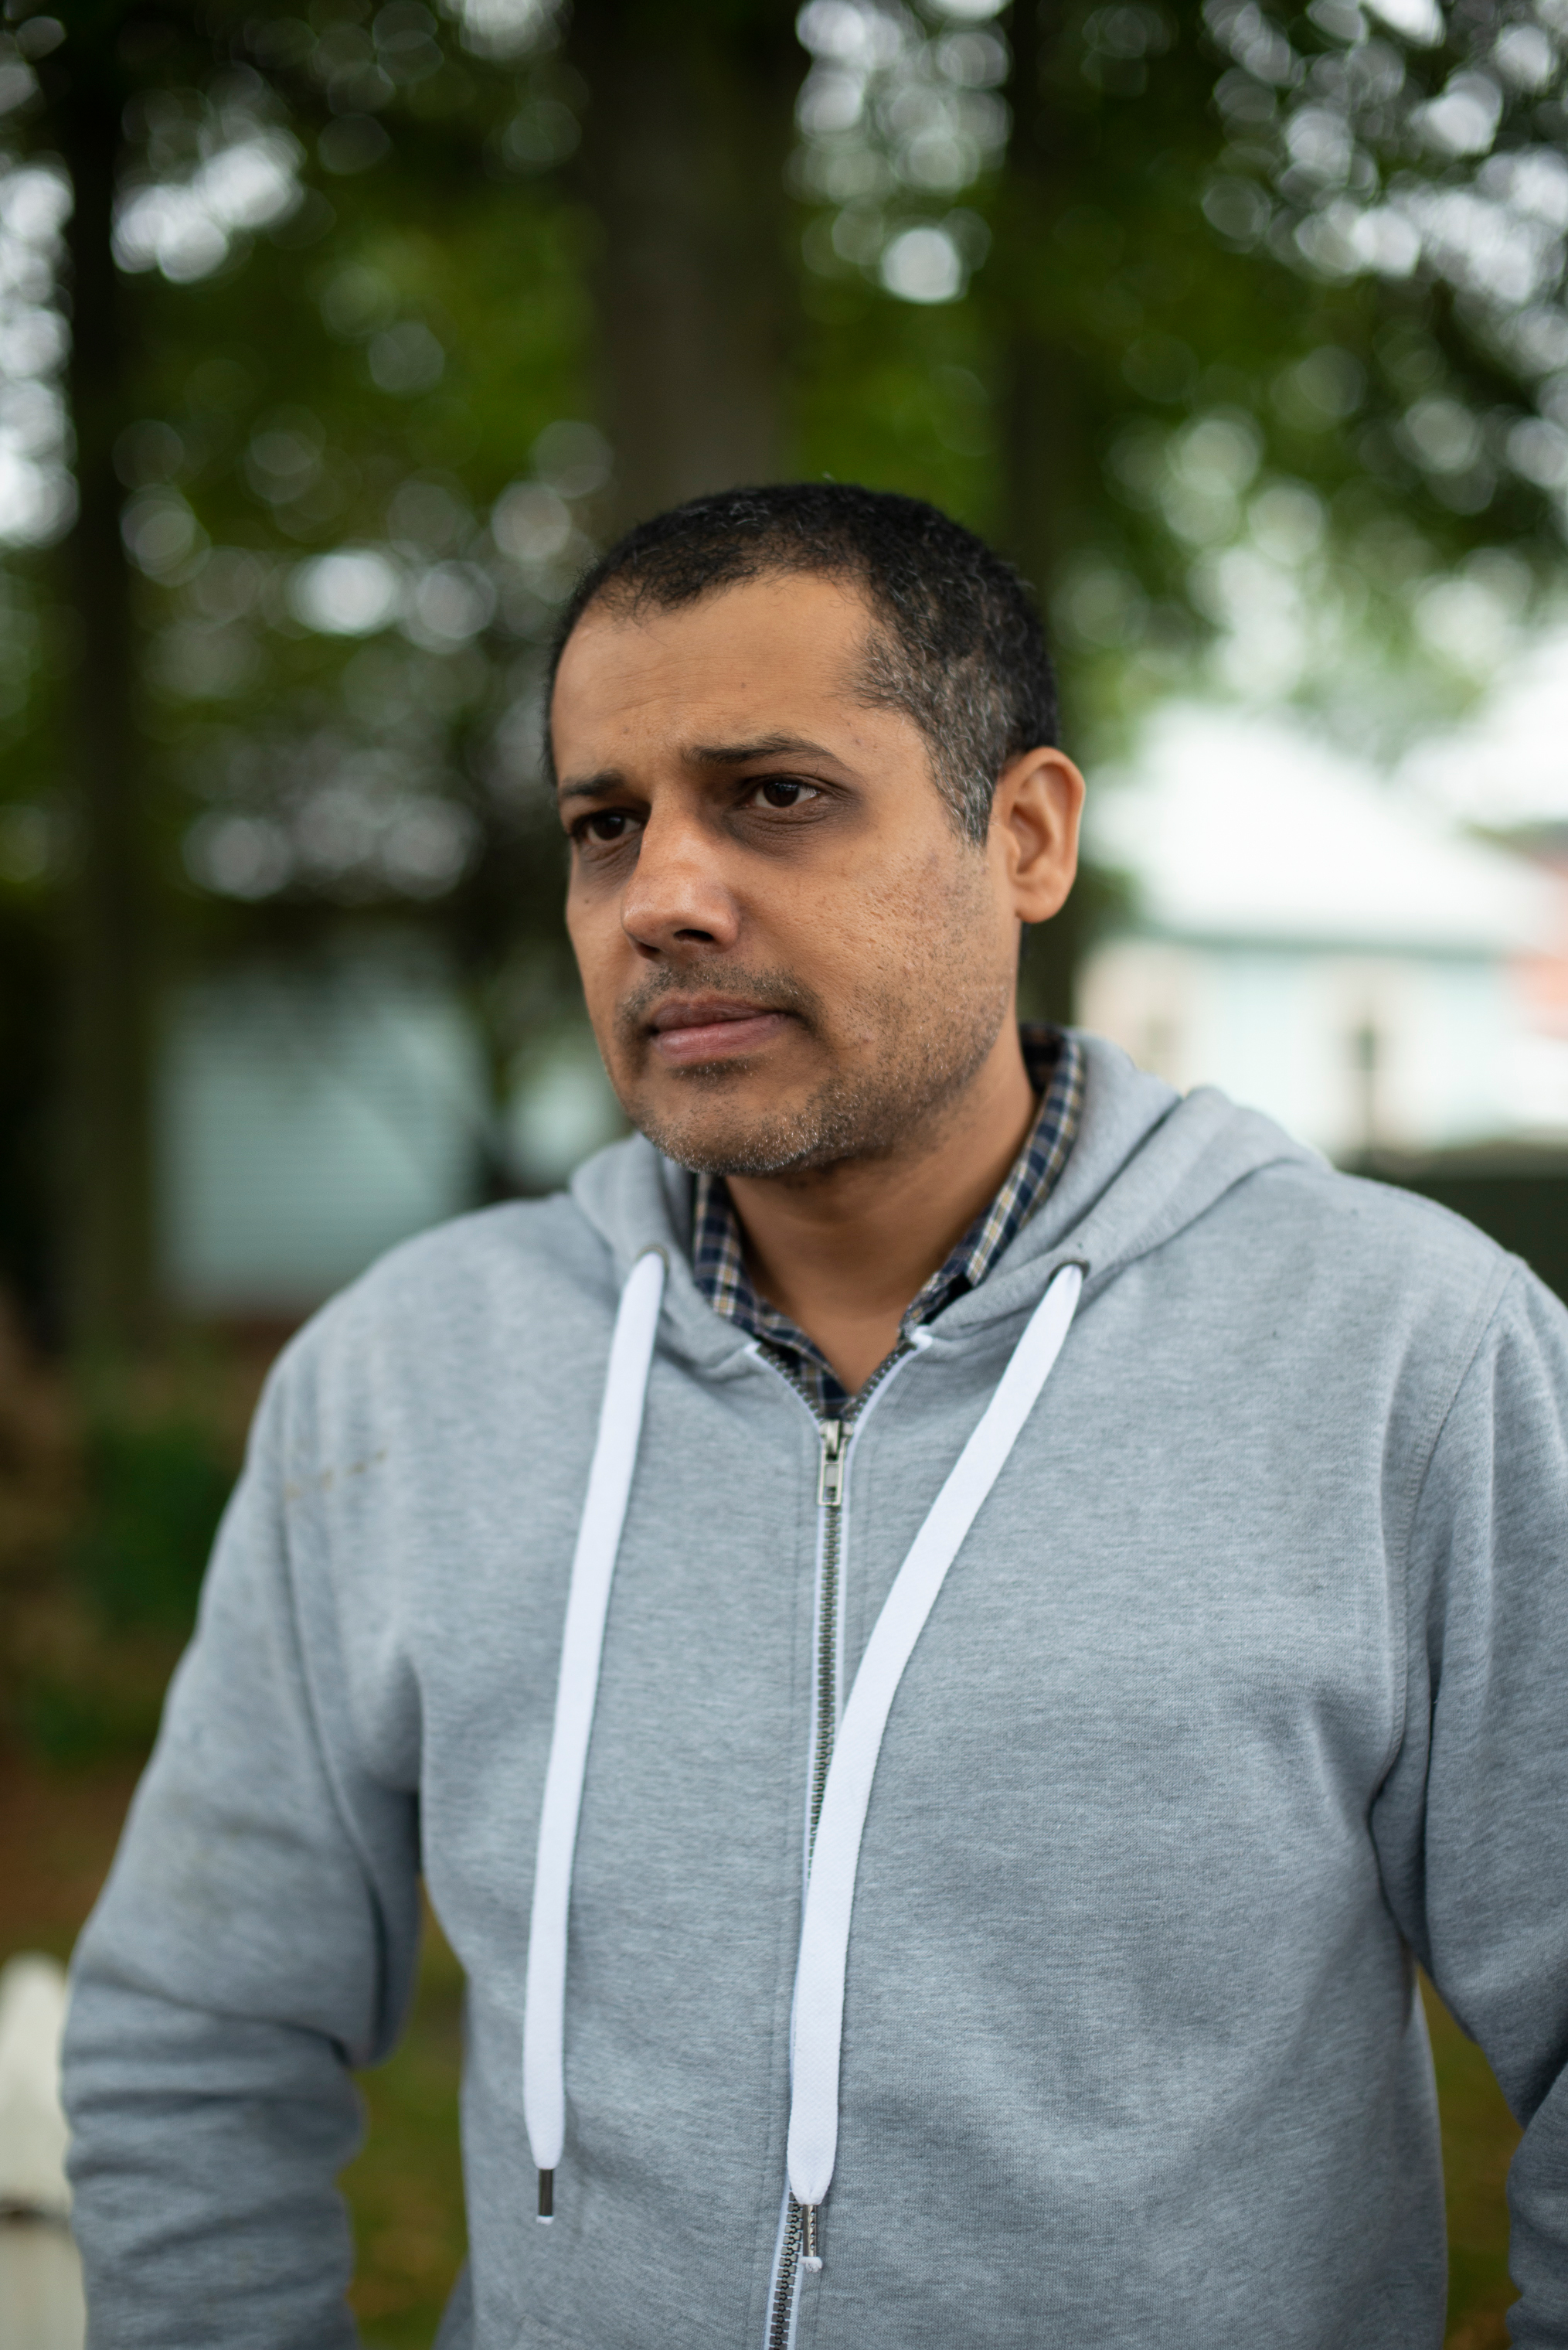 Mohsan Ali, 37, narrowly escaped the attack on the Al Noor mosque in Christchurch, New Zealand. His wife survived by hiding in a bathroom.